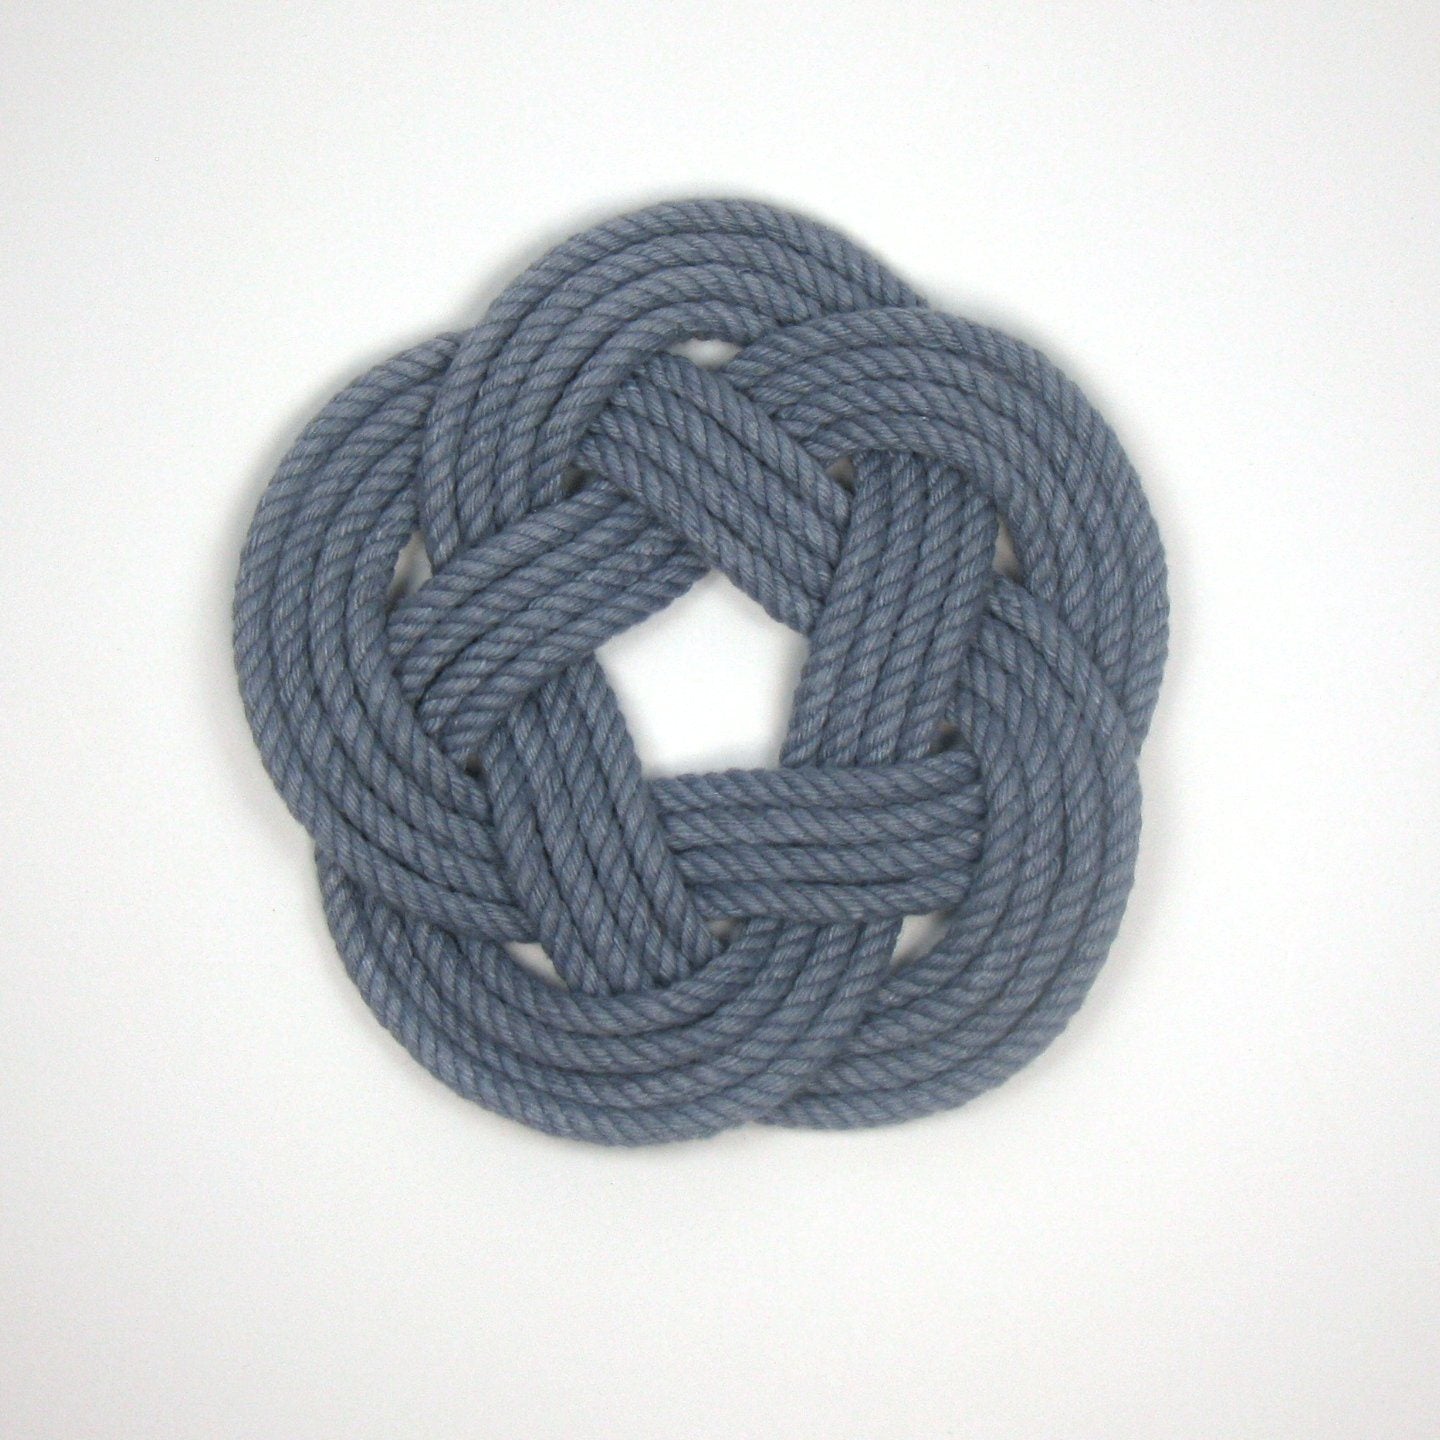 Nautical Knot Sailor Knot Coasters, Woven in Grey , Set of 4 handmade at Mystic Knotwork